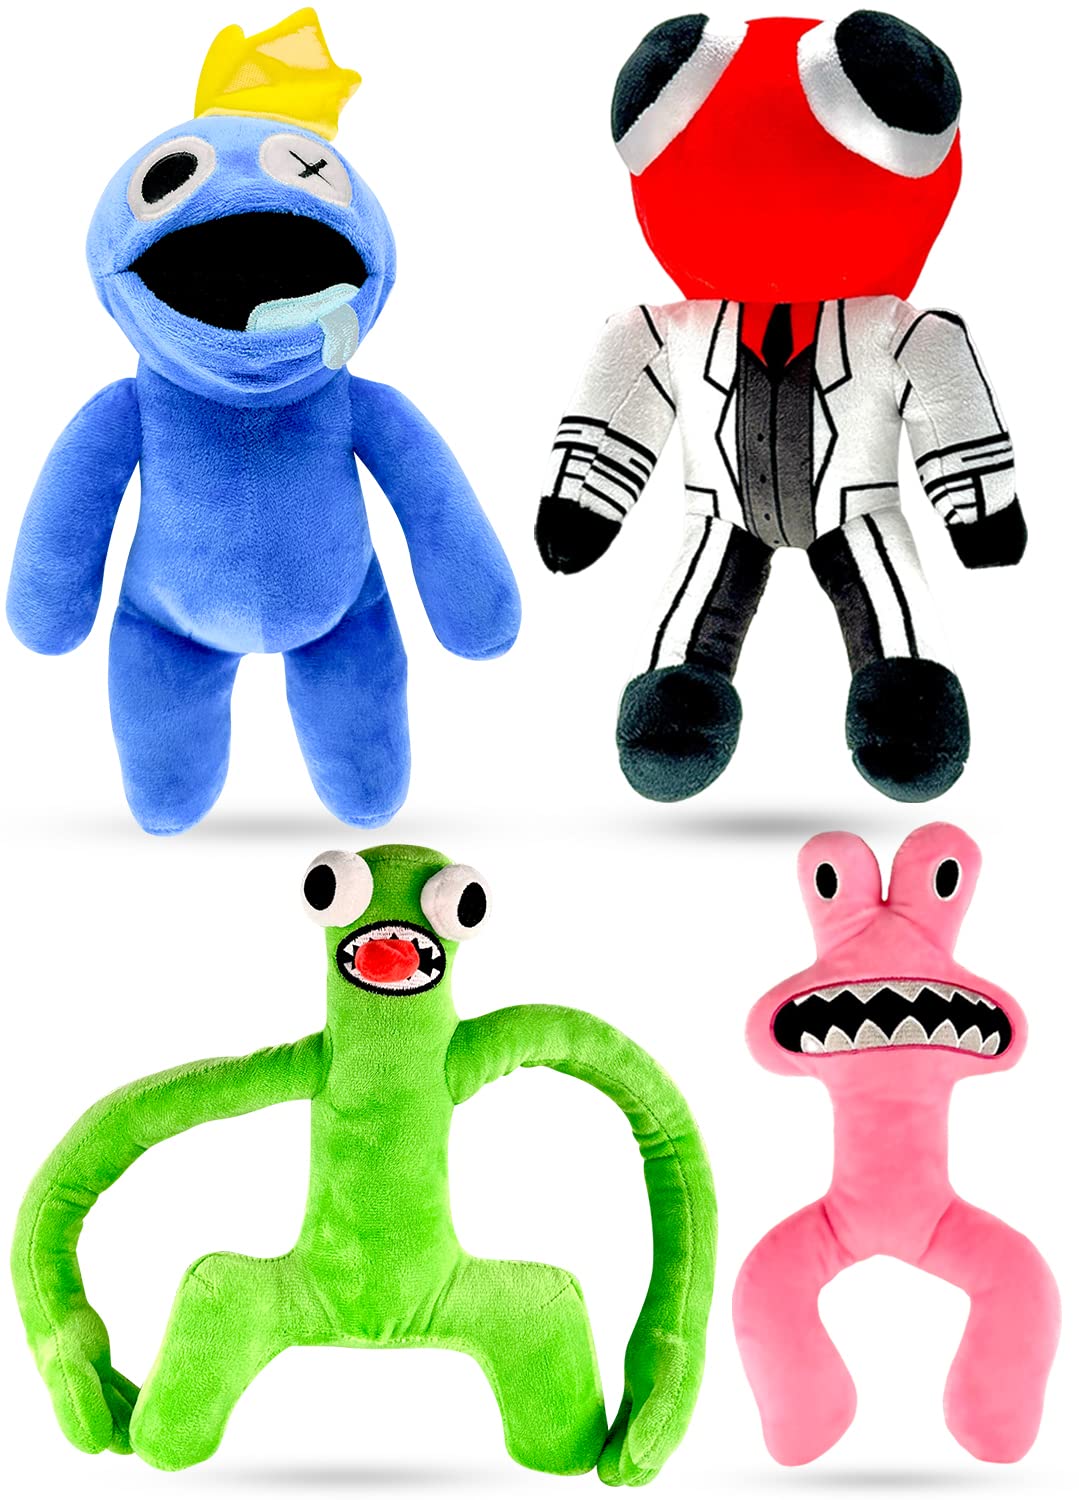 Soft and Iconic: Doors Soft Toys